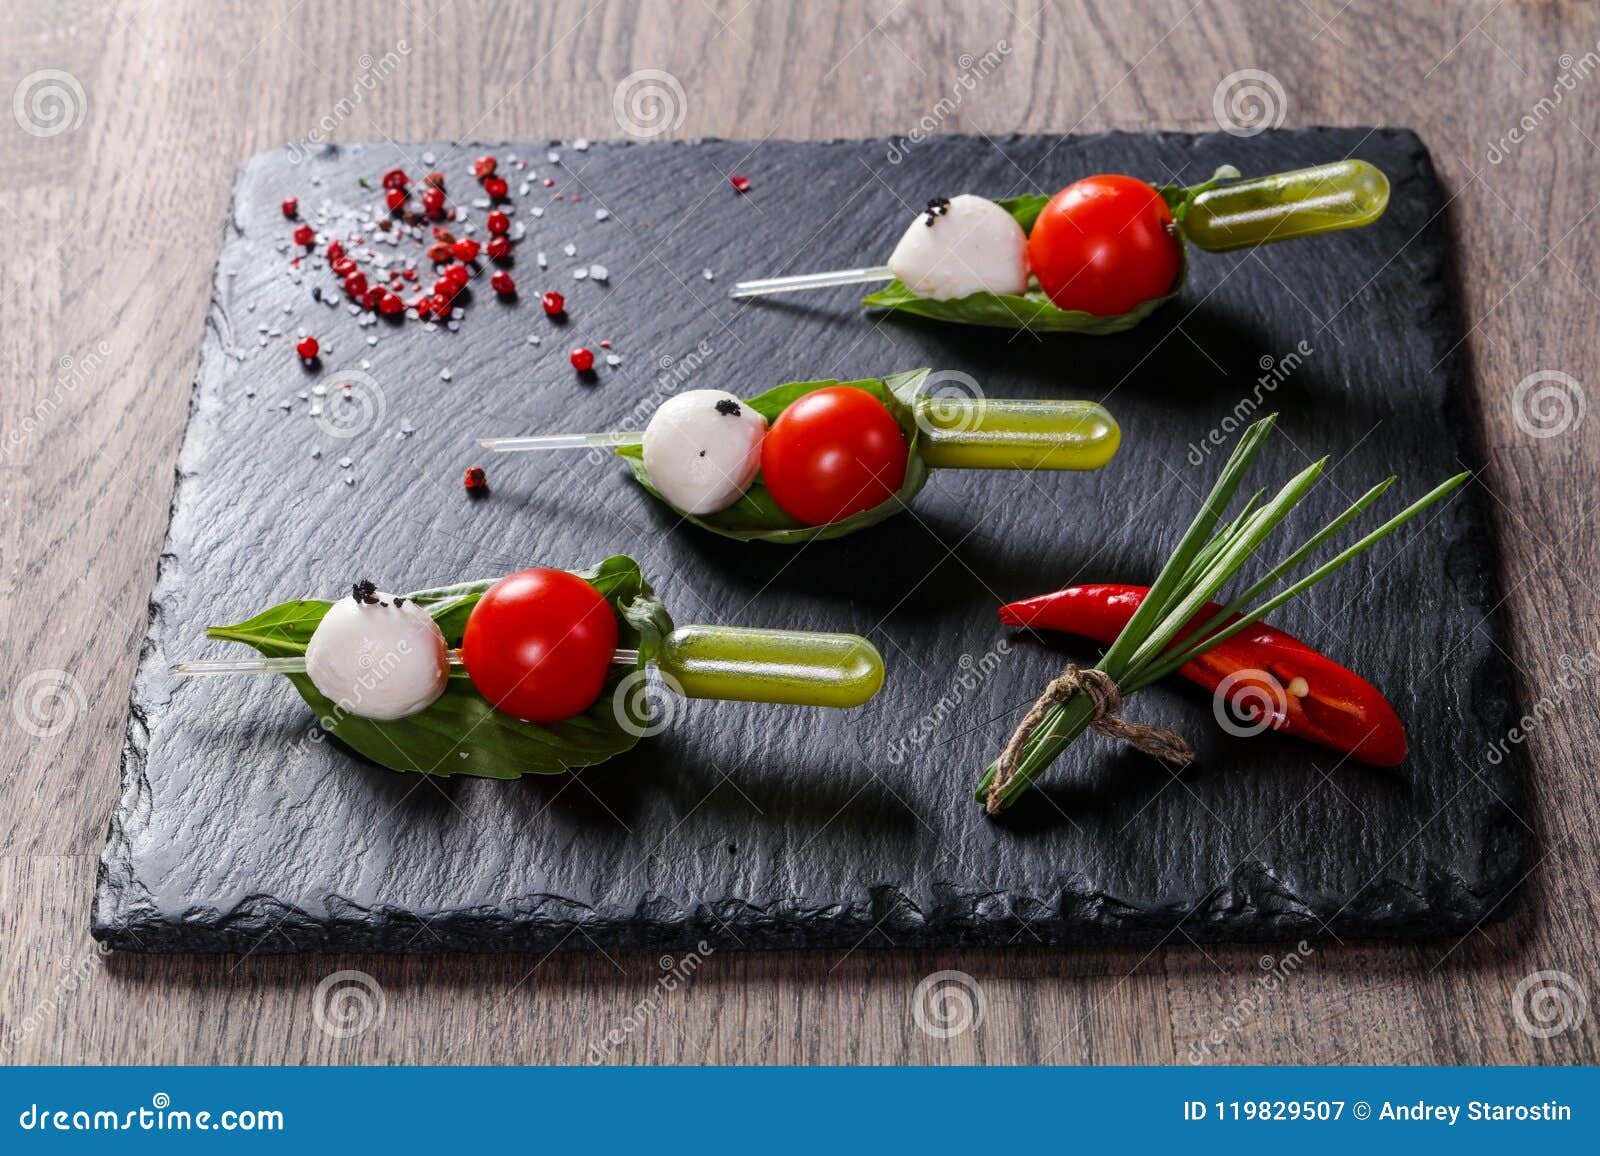 Canape caprese with oil stock image. Image of lunch - 119829507